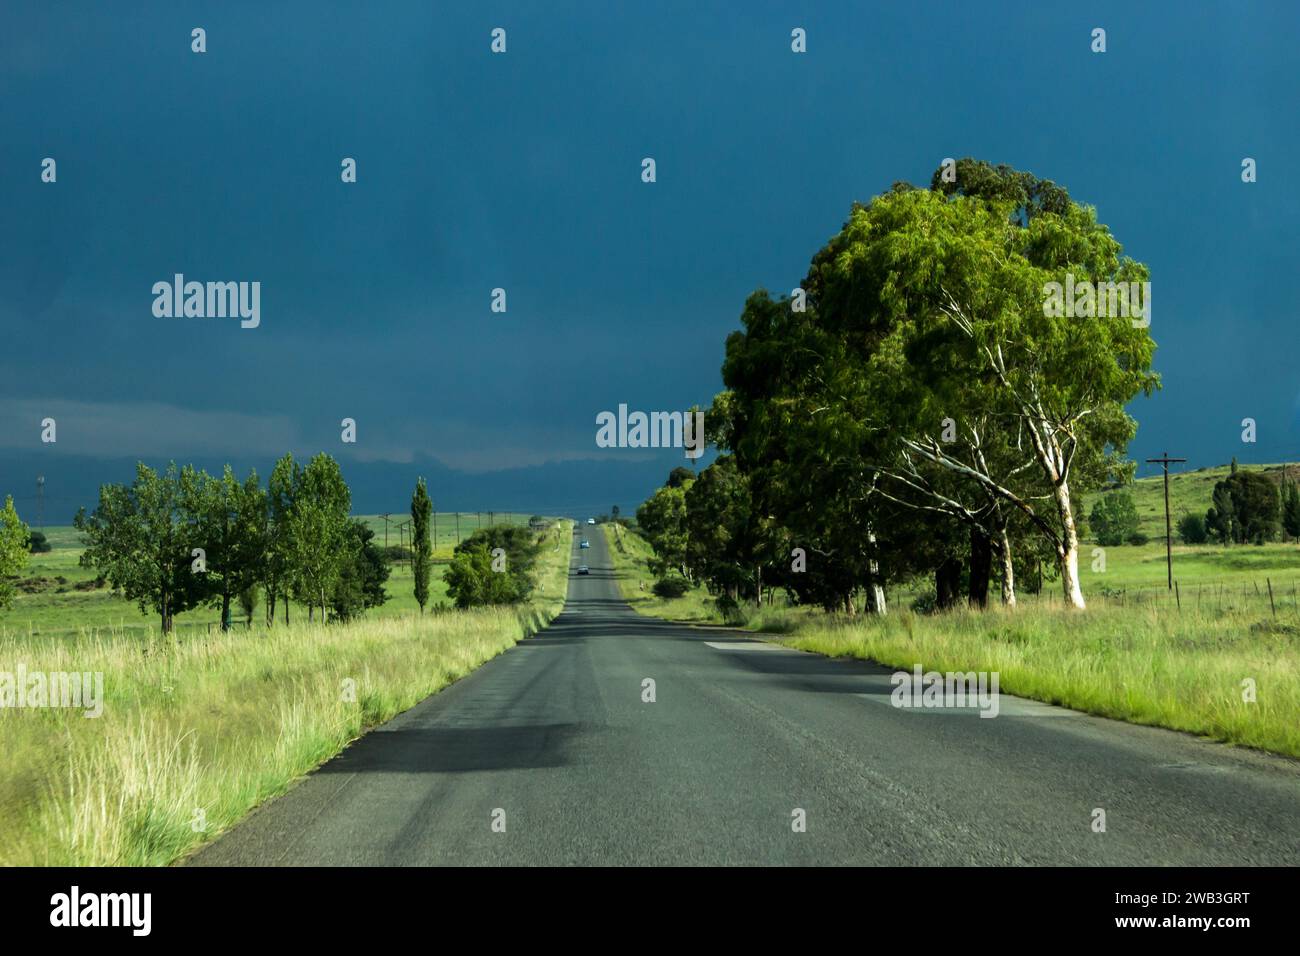 Sunlight illuminating a small stand of Eucalyptus trees against an ominous gathering storm Stock Photo